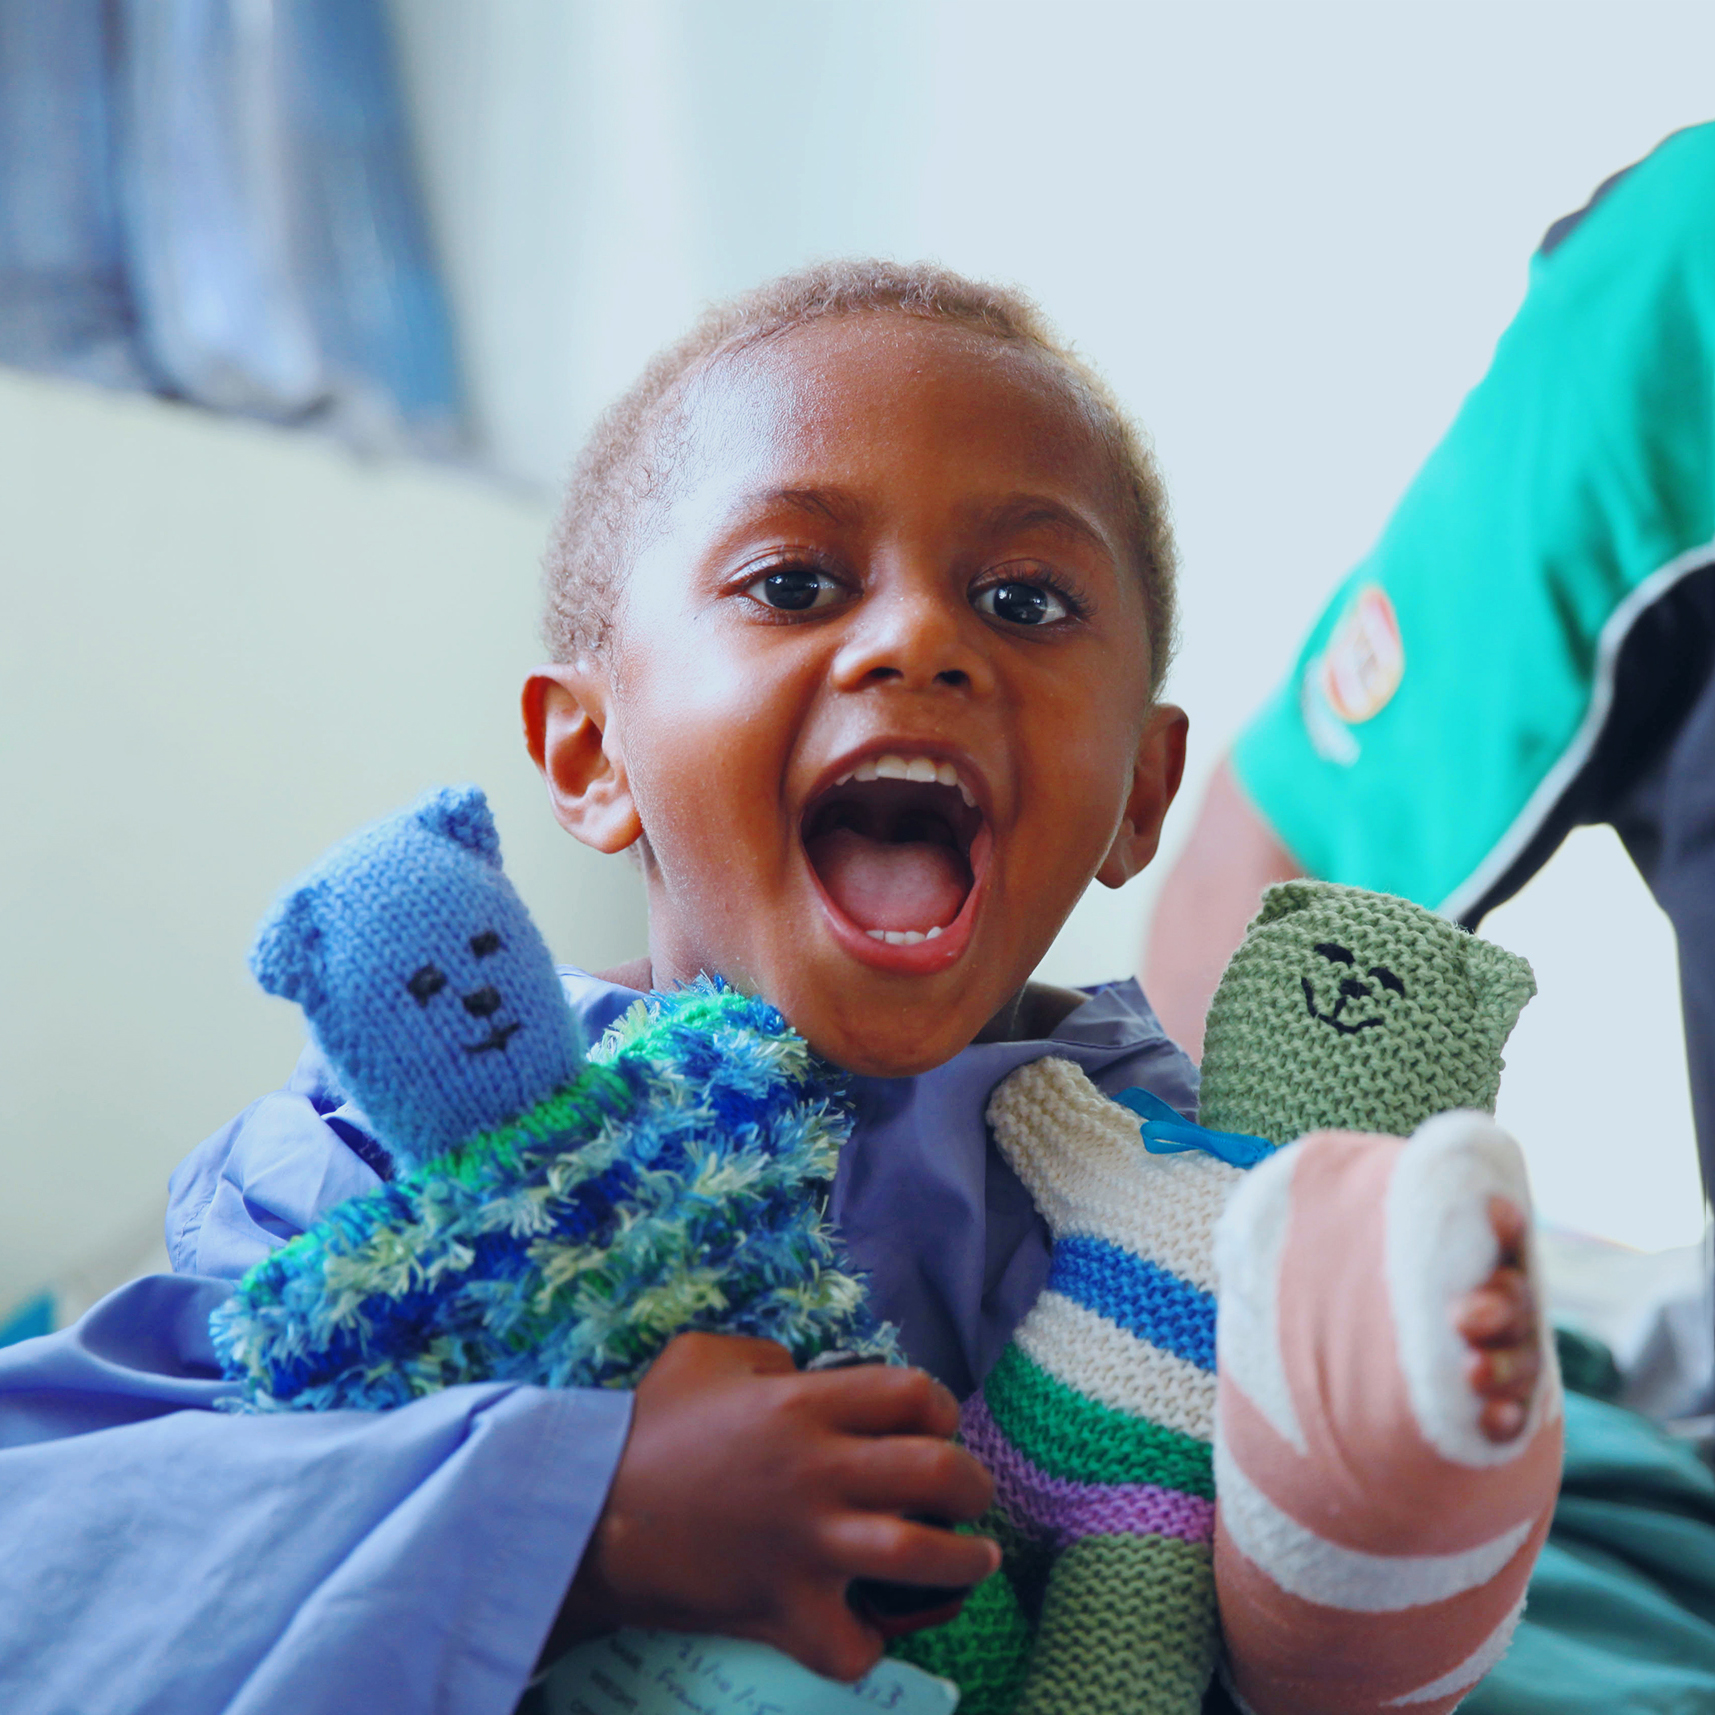 Young boy with a bandaged hand hugs two teddies and smiles excitedly.